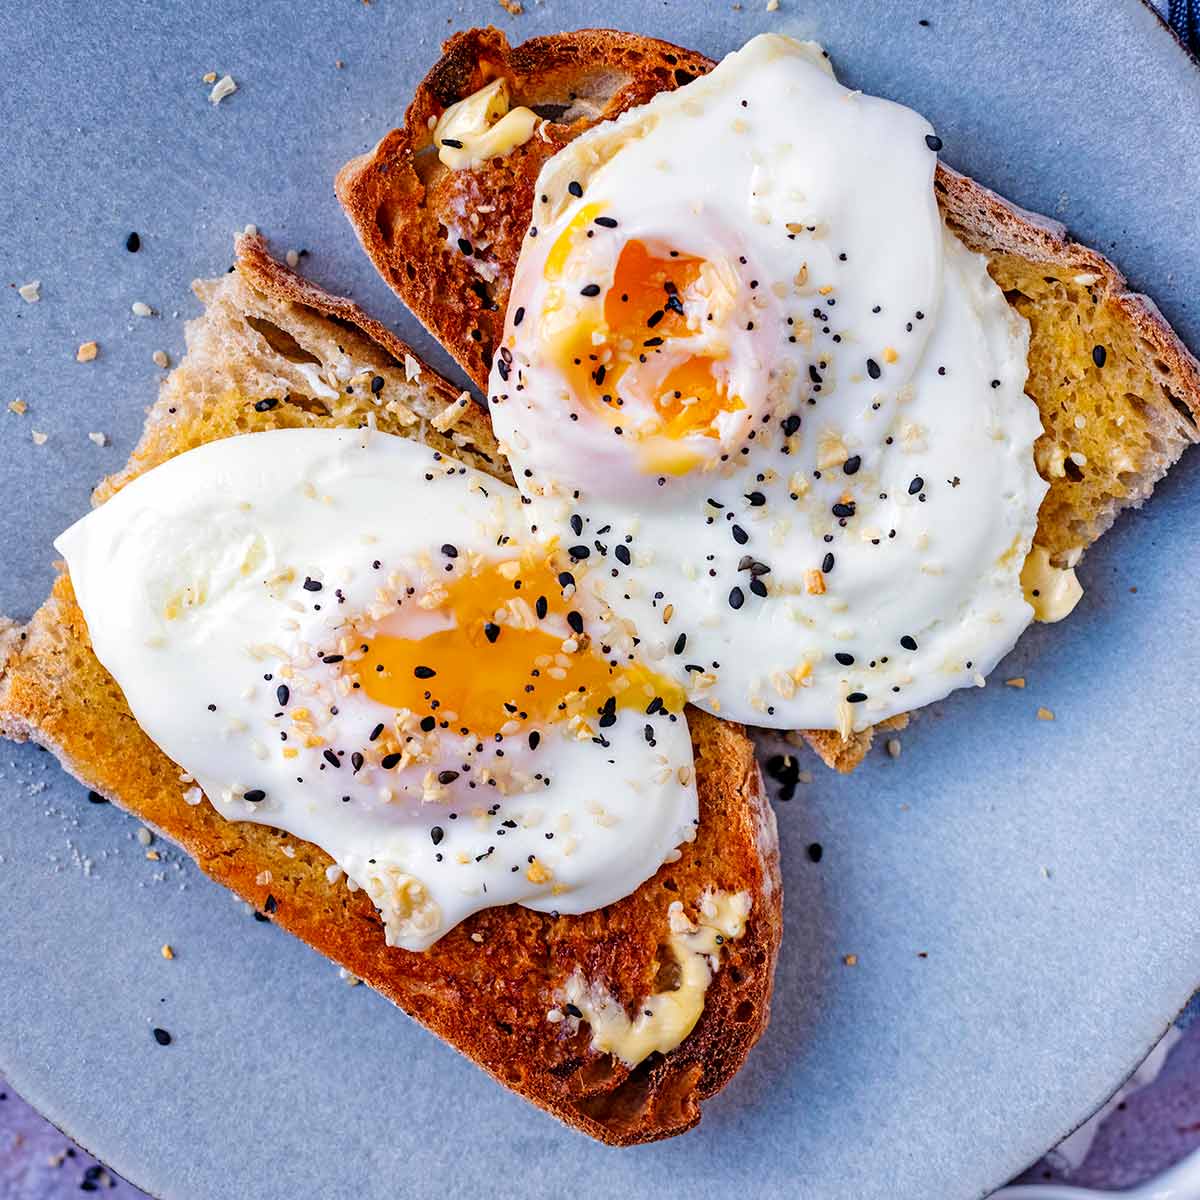 https://hungryhealthyhappy.com/wp-content/uploads/2022/01/Microwave-Fried-Eggs-featured.jpg